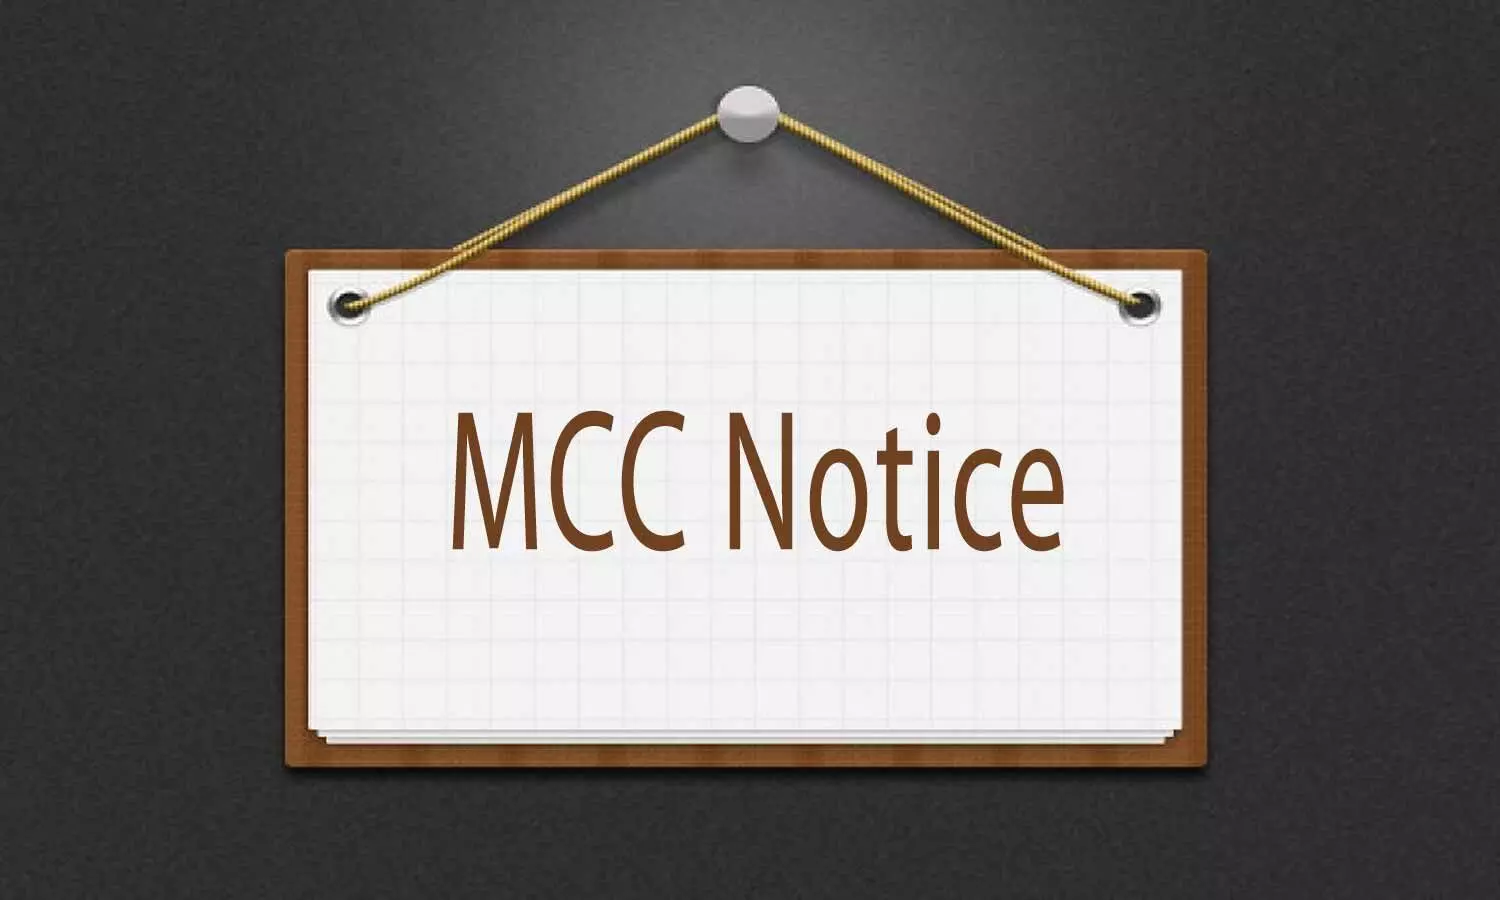 MCC releases list of Indian to NRI candidates eligible for Mop Up Round of NEET Counselling 2020